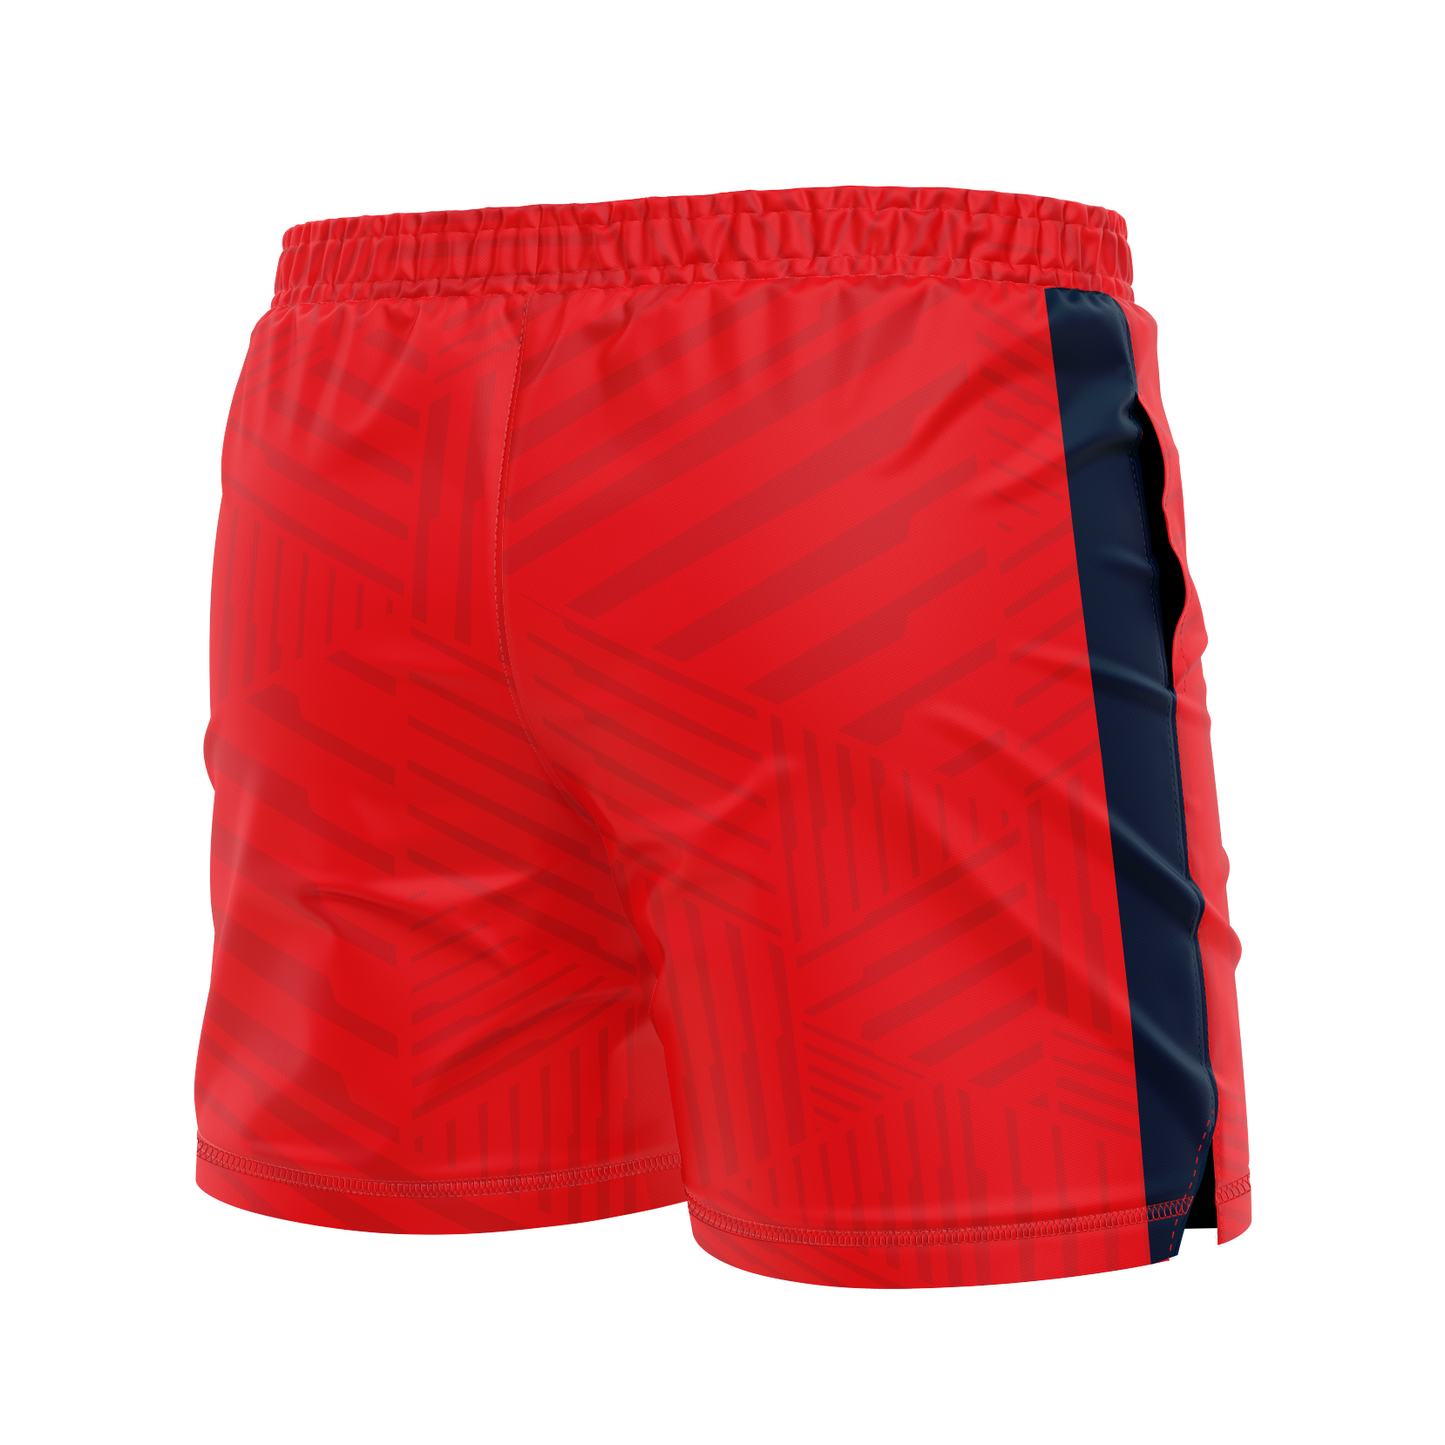 CCFC men's FC shorts Enforcers, red and navy